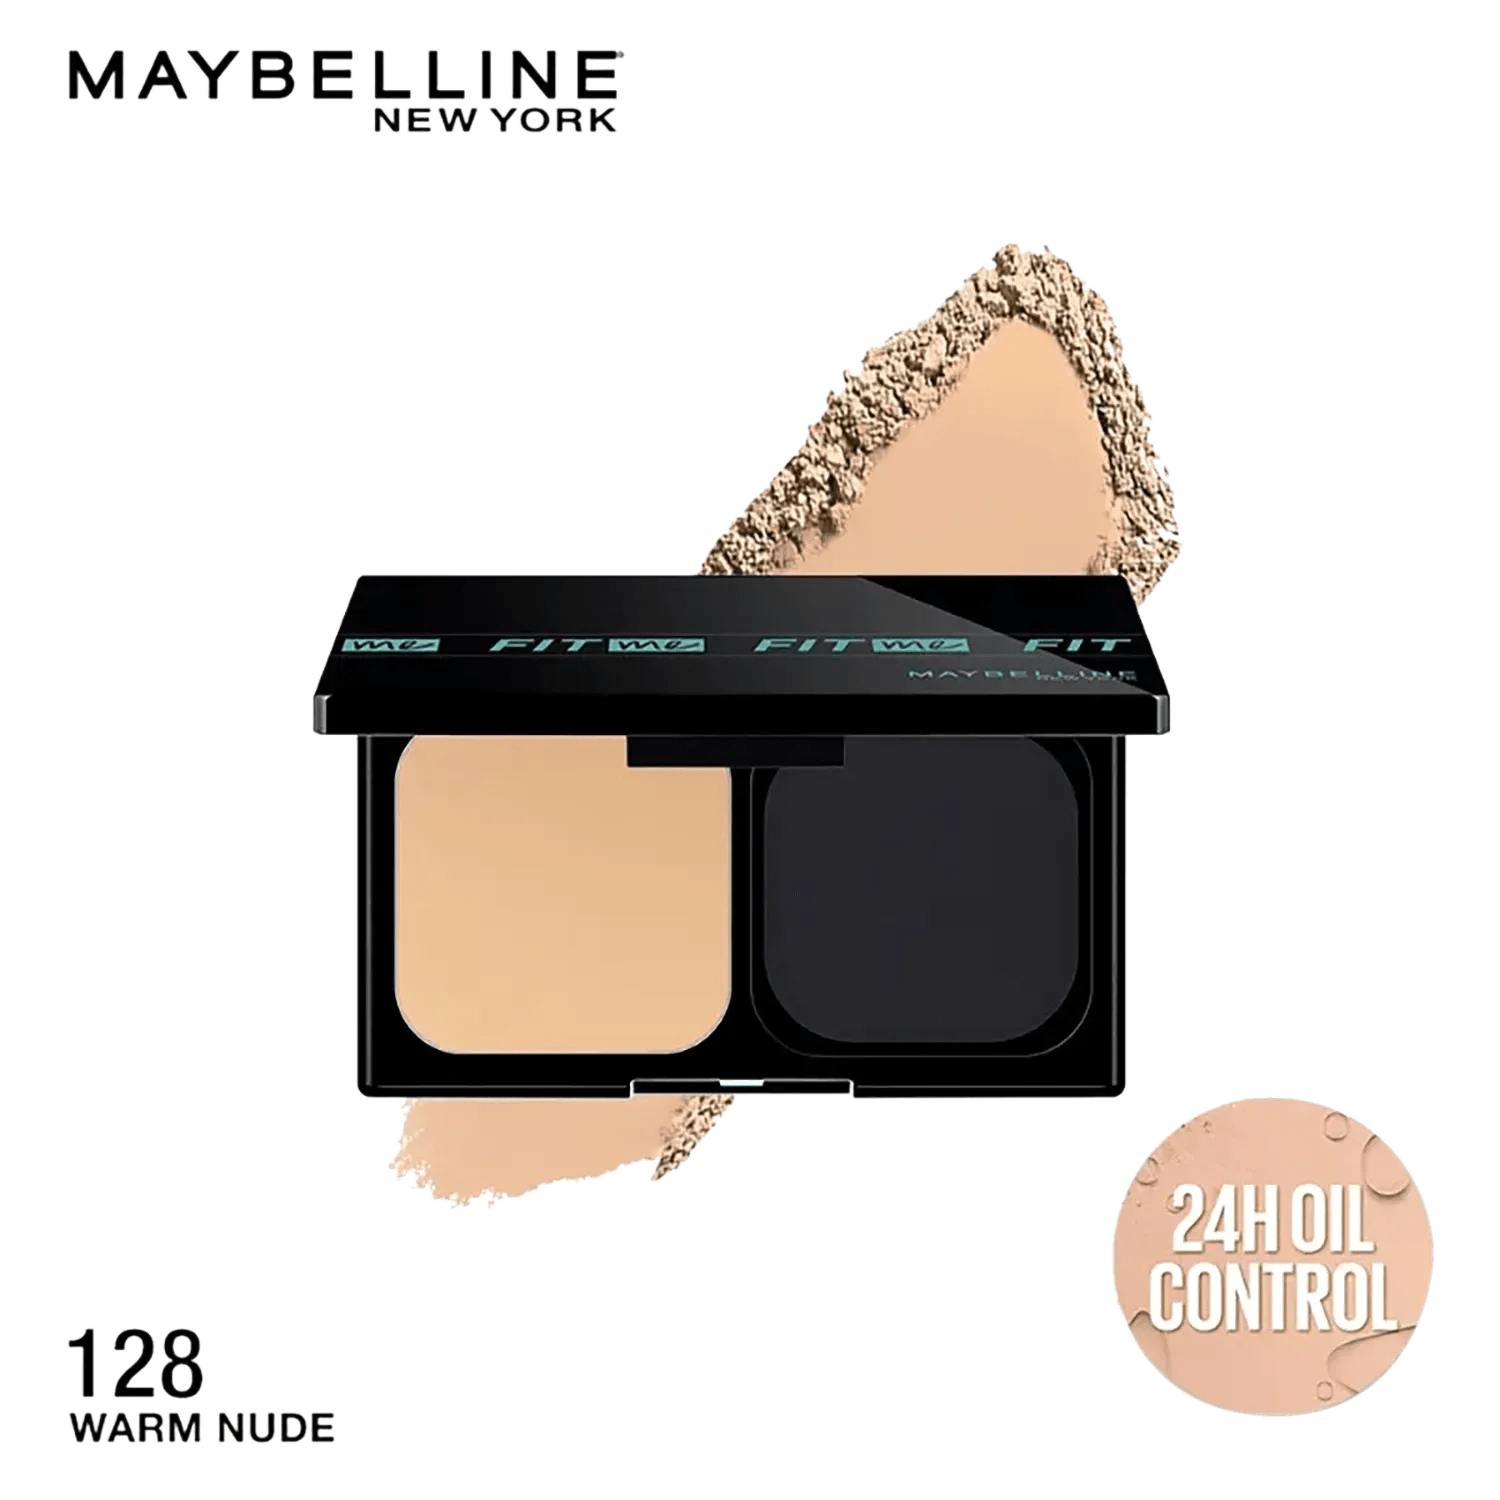 Maybelline New York | Maybelline New York Fit Me Ultimate Powder Foundation - Shade 110 (9g)